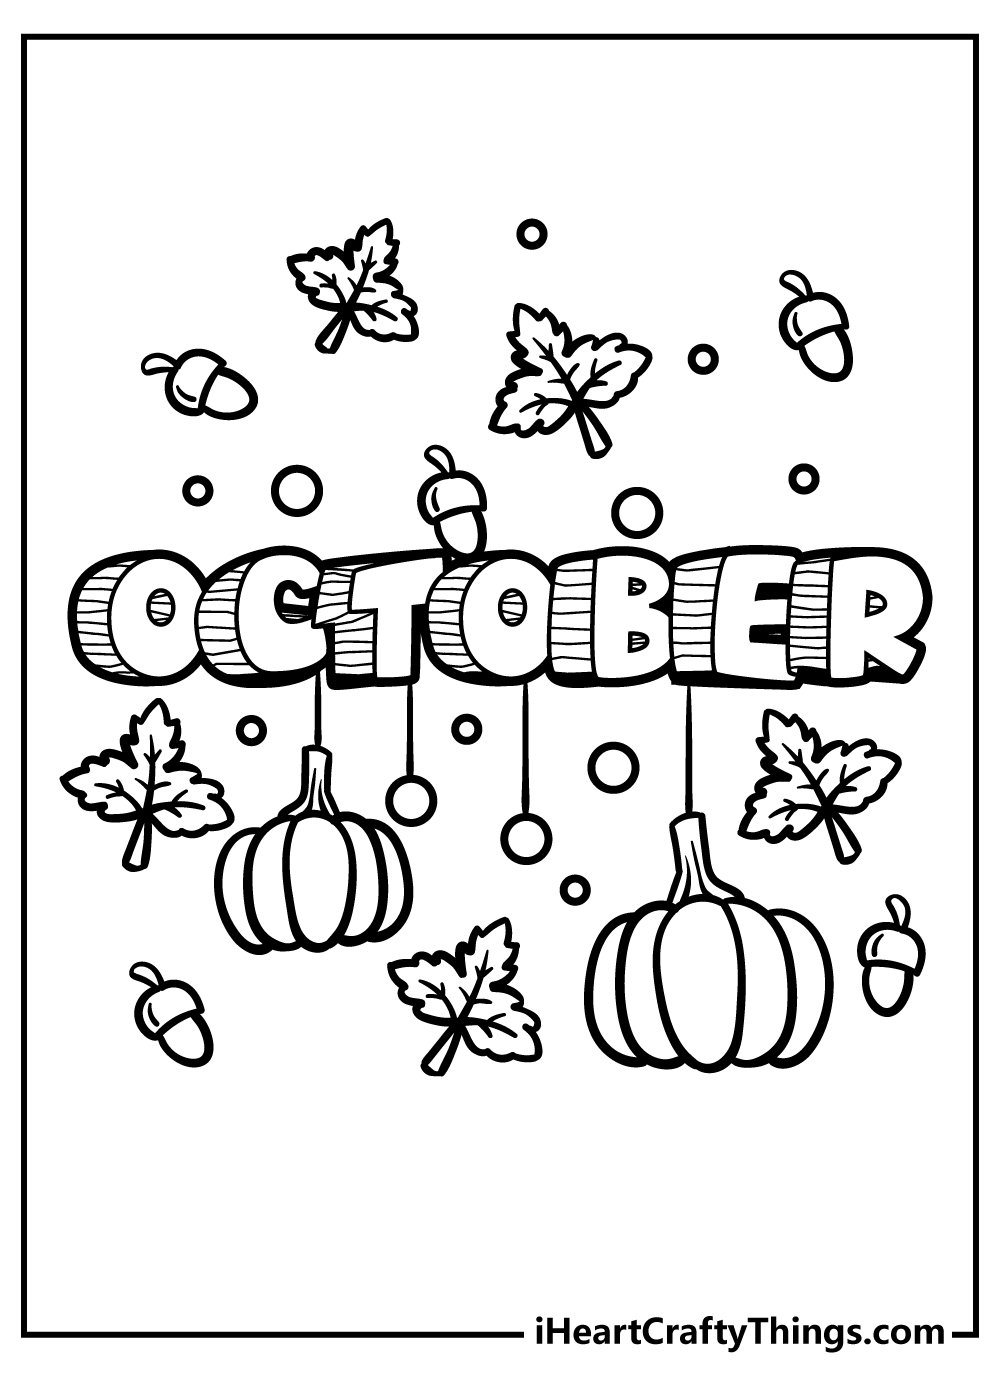 October Coloring Book for adults free download